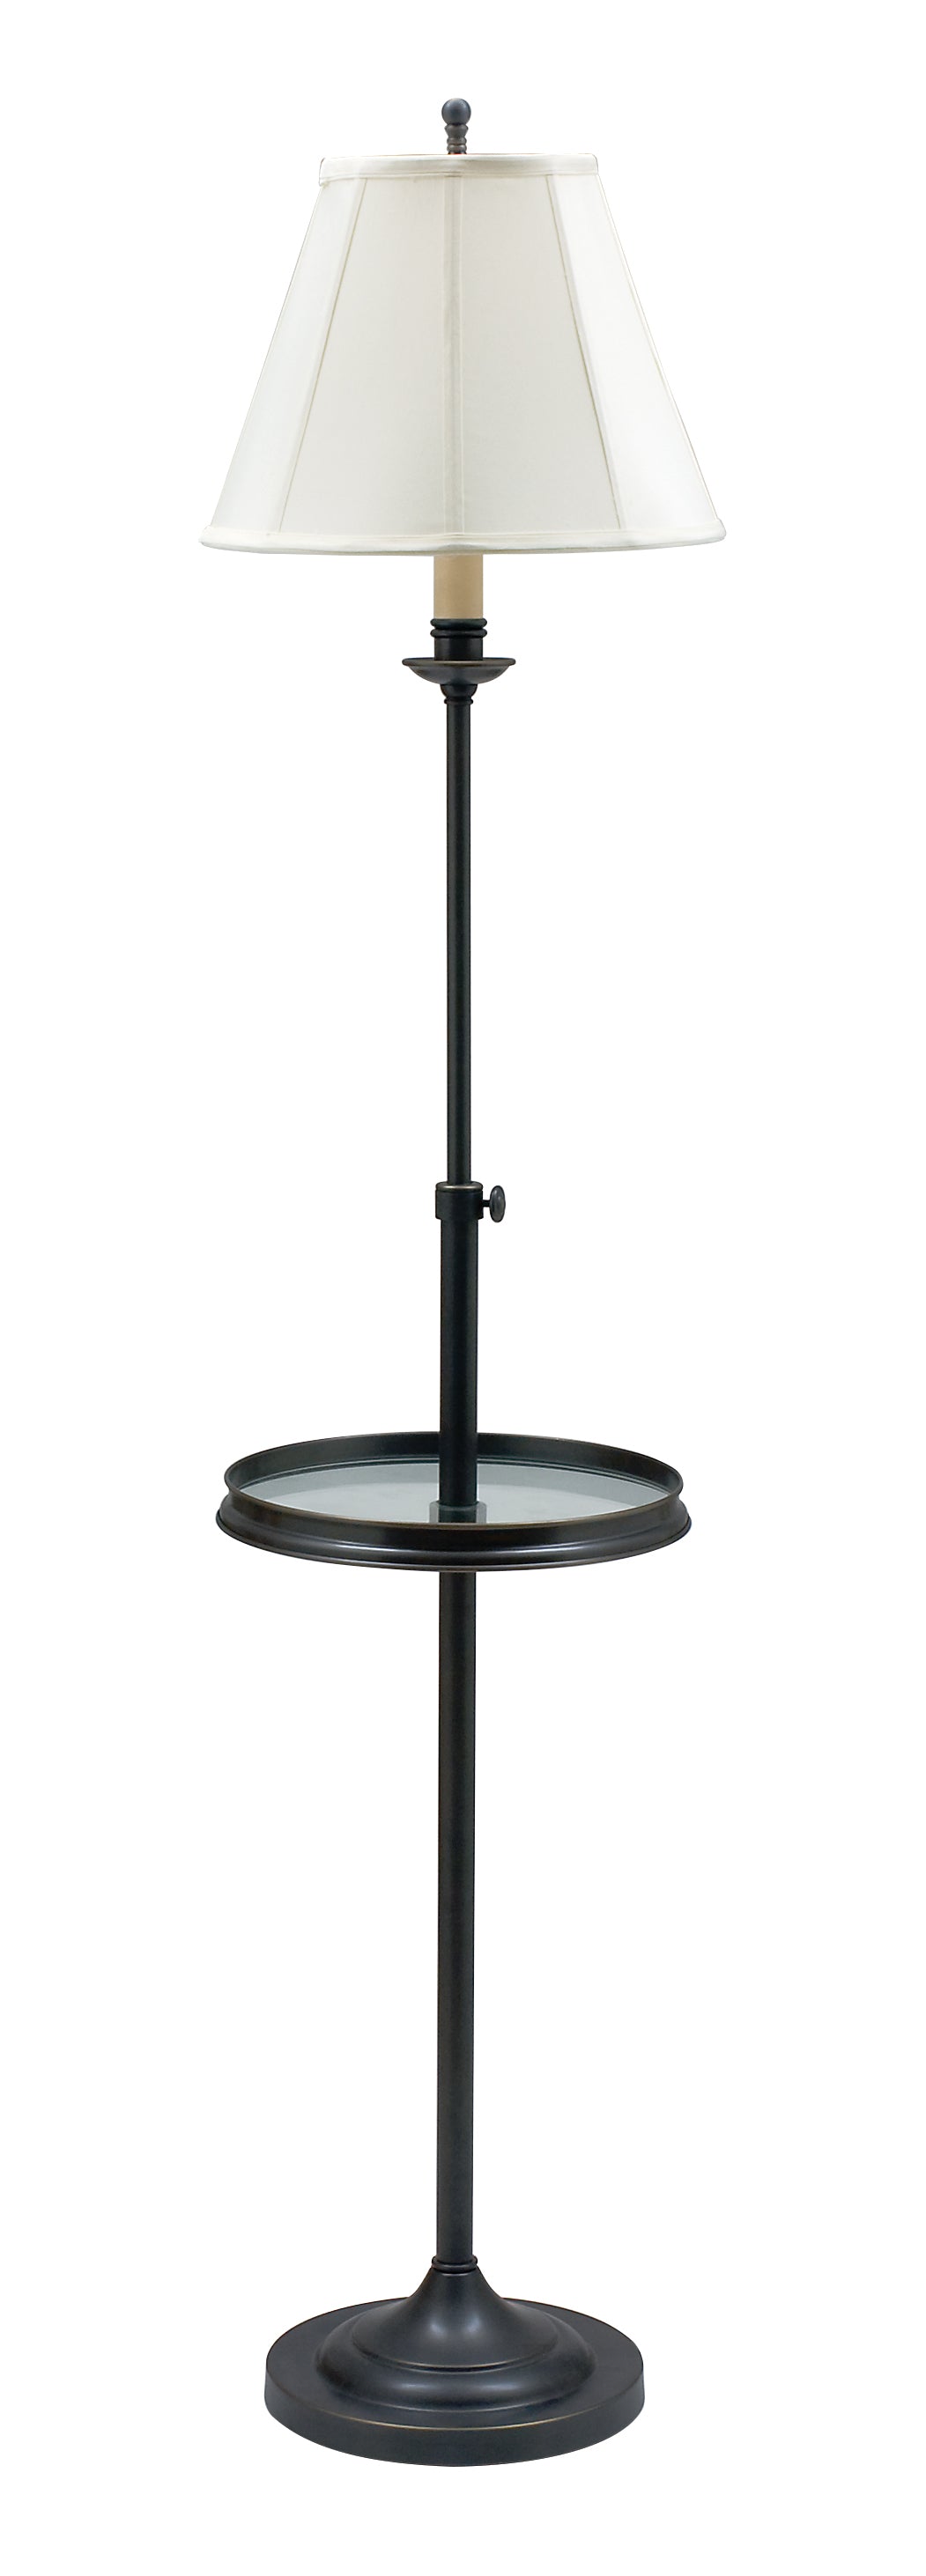 House of Troy Club Adjustable Oil Rubbed Bronze Floor Lamp with glass table CL202-OB